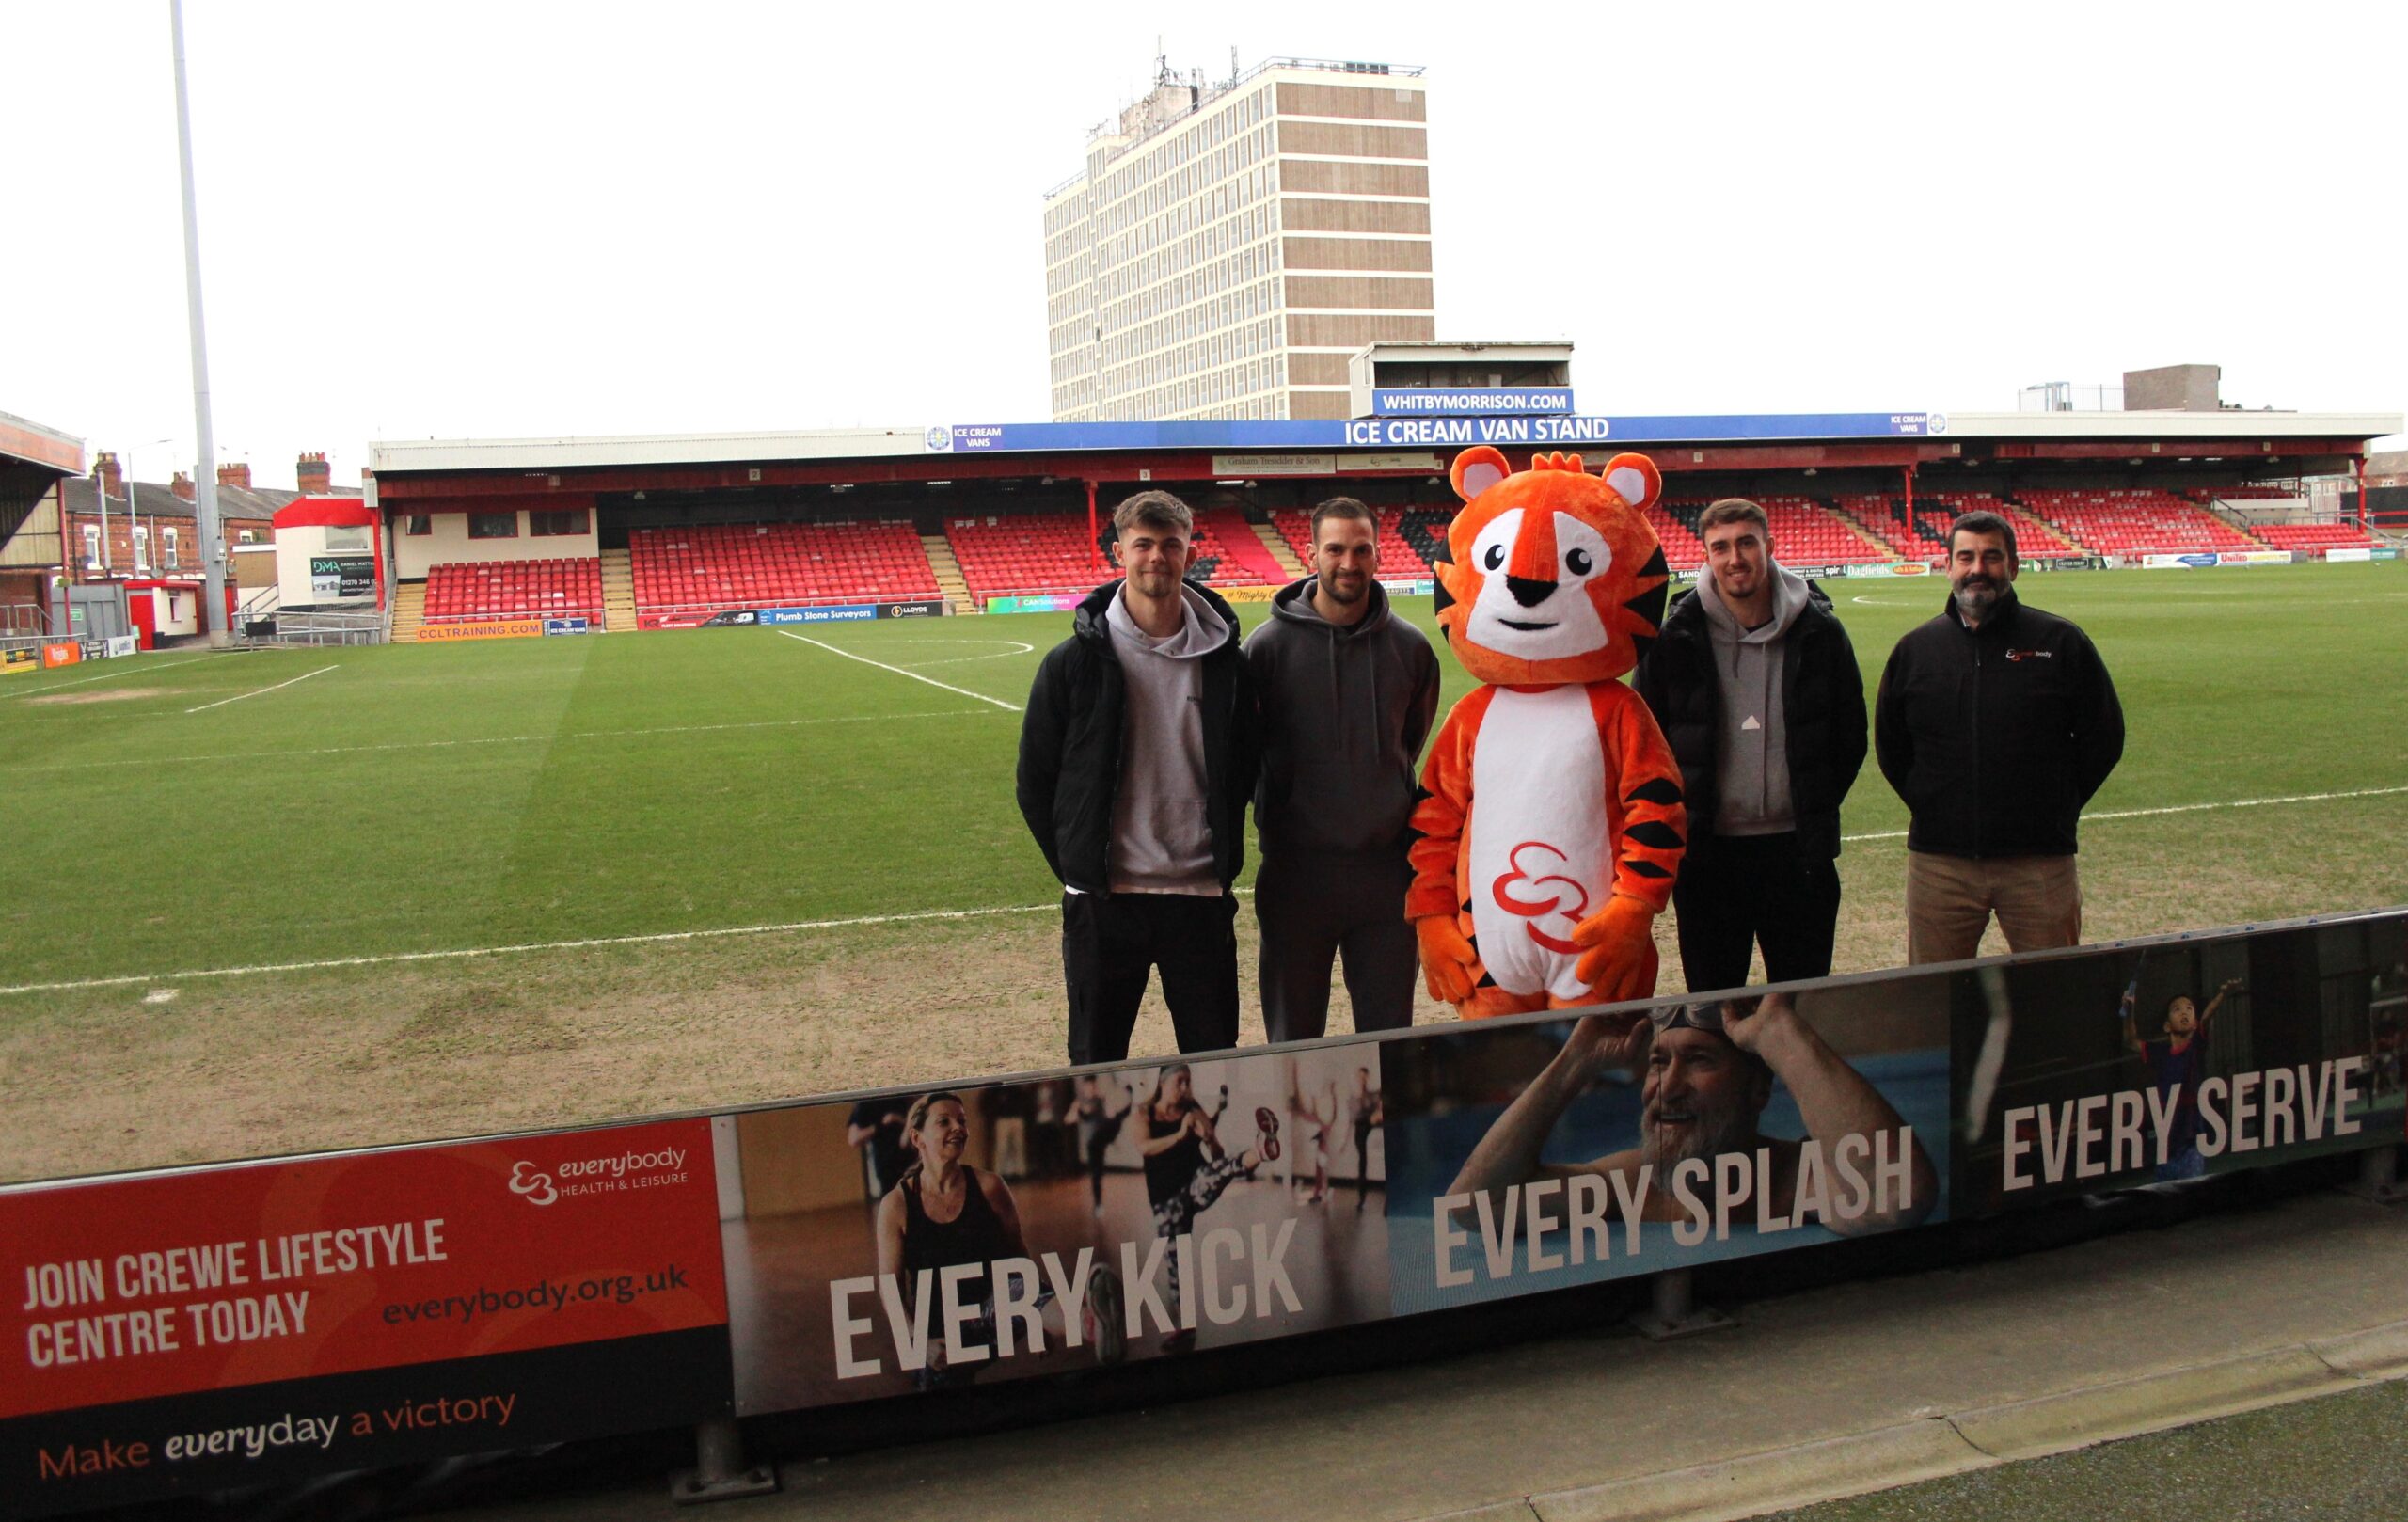 L-R: Tom Booth, Mickey Demetriou, Todd the Tiger Everybody Mascot, Lewis Billington, Richard Jones Area General Manager at Everybody Health & Leisure